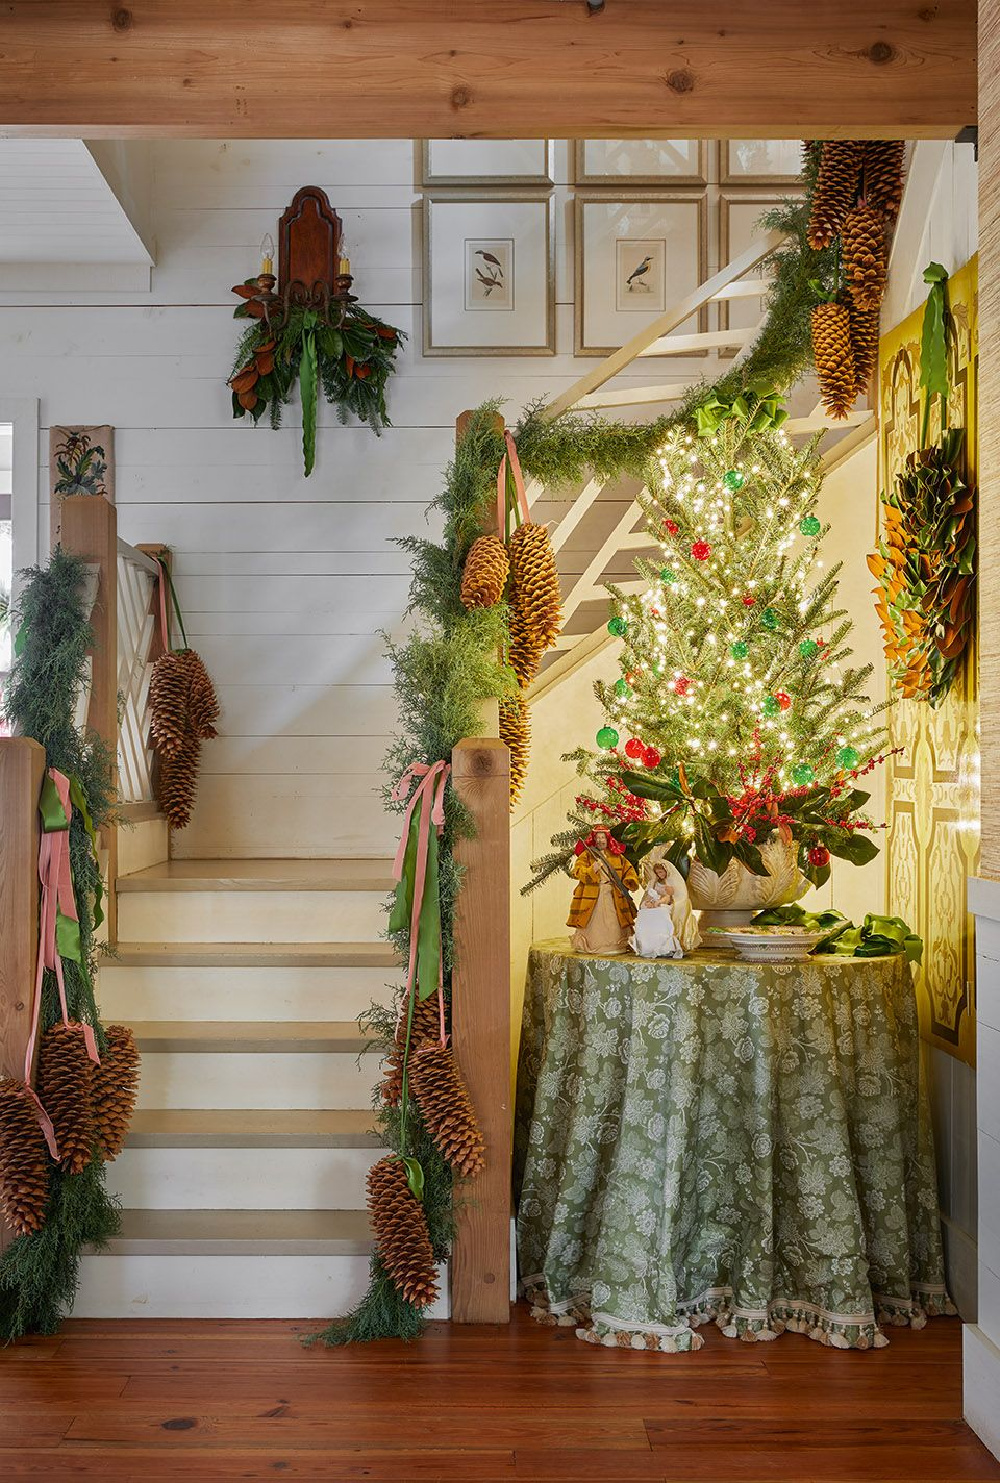 Breathtaking holiday staircase decorated with garland and small Christmas tree on skirted round table in James Farmer's charming home - from CELEBRATING HOME (Gibbs Smith, 2022). #holidaydecor #staircase